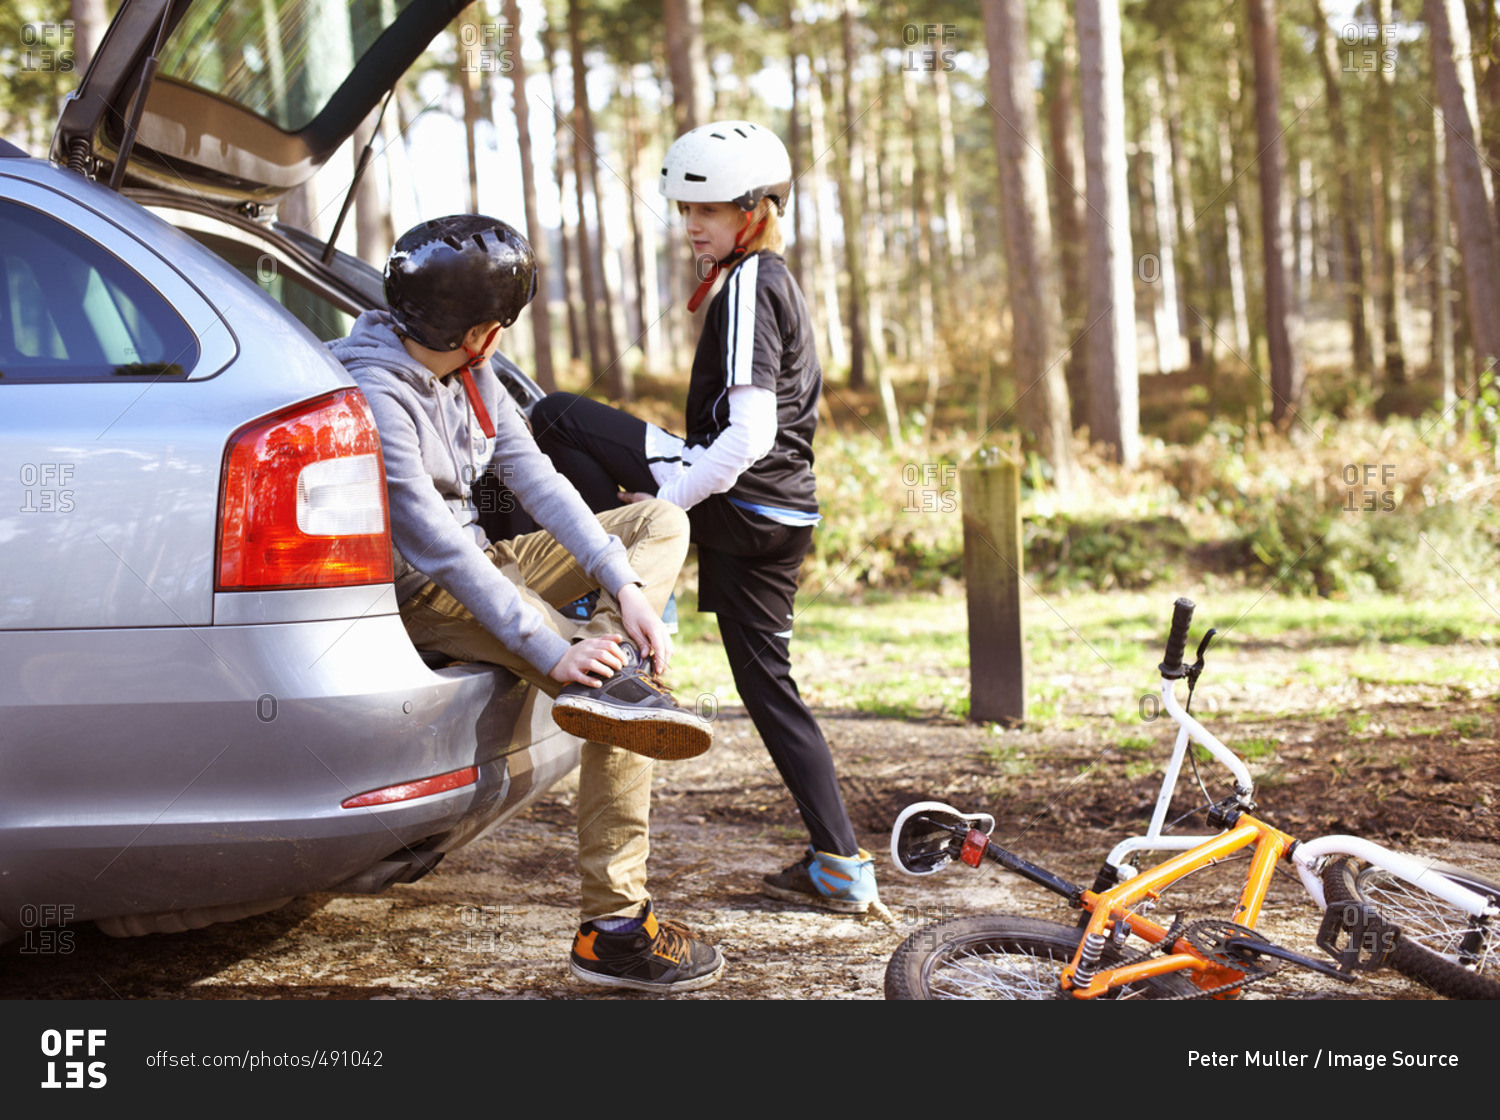 Twin brothers preparing to ride bikes in forest